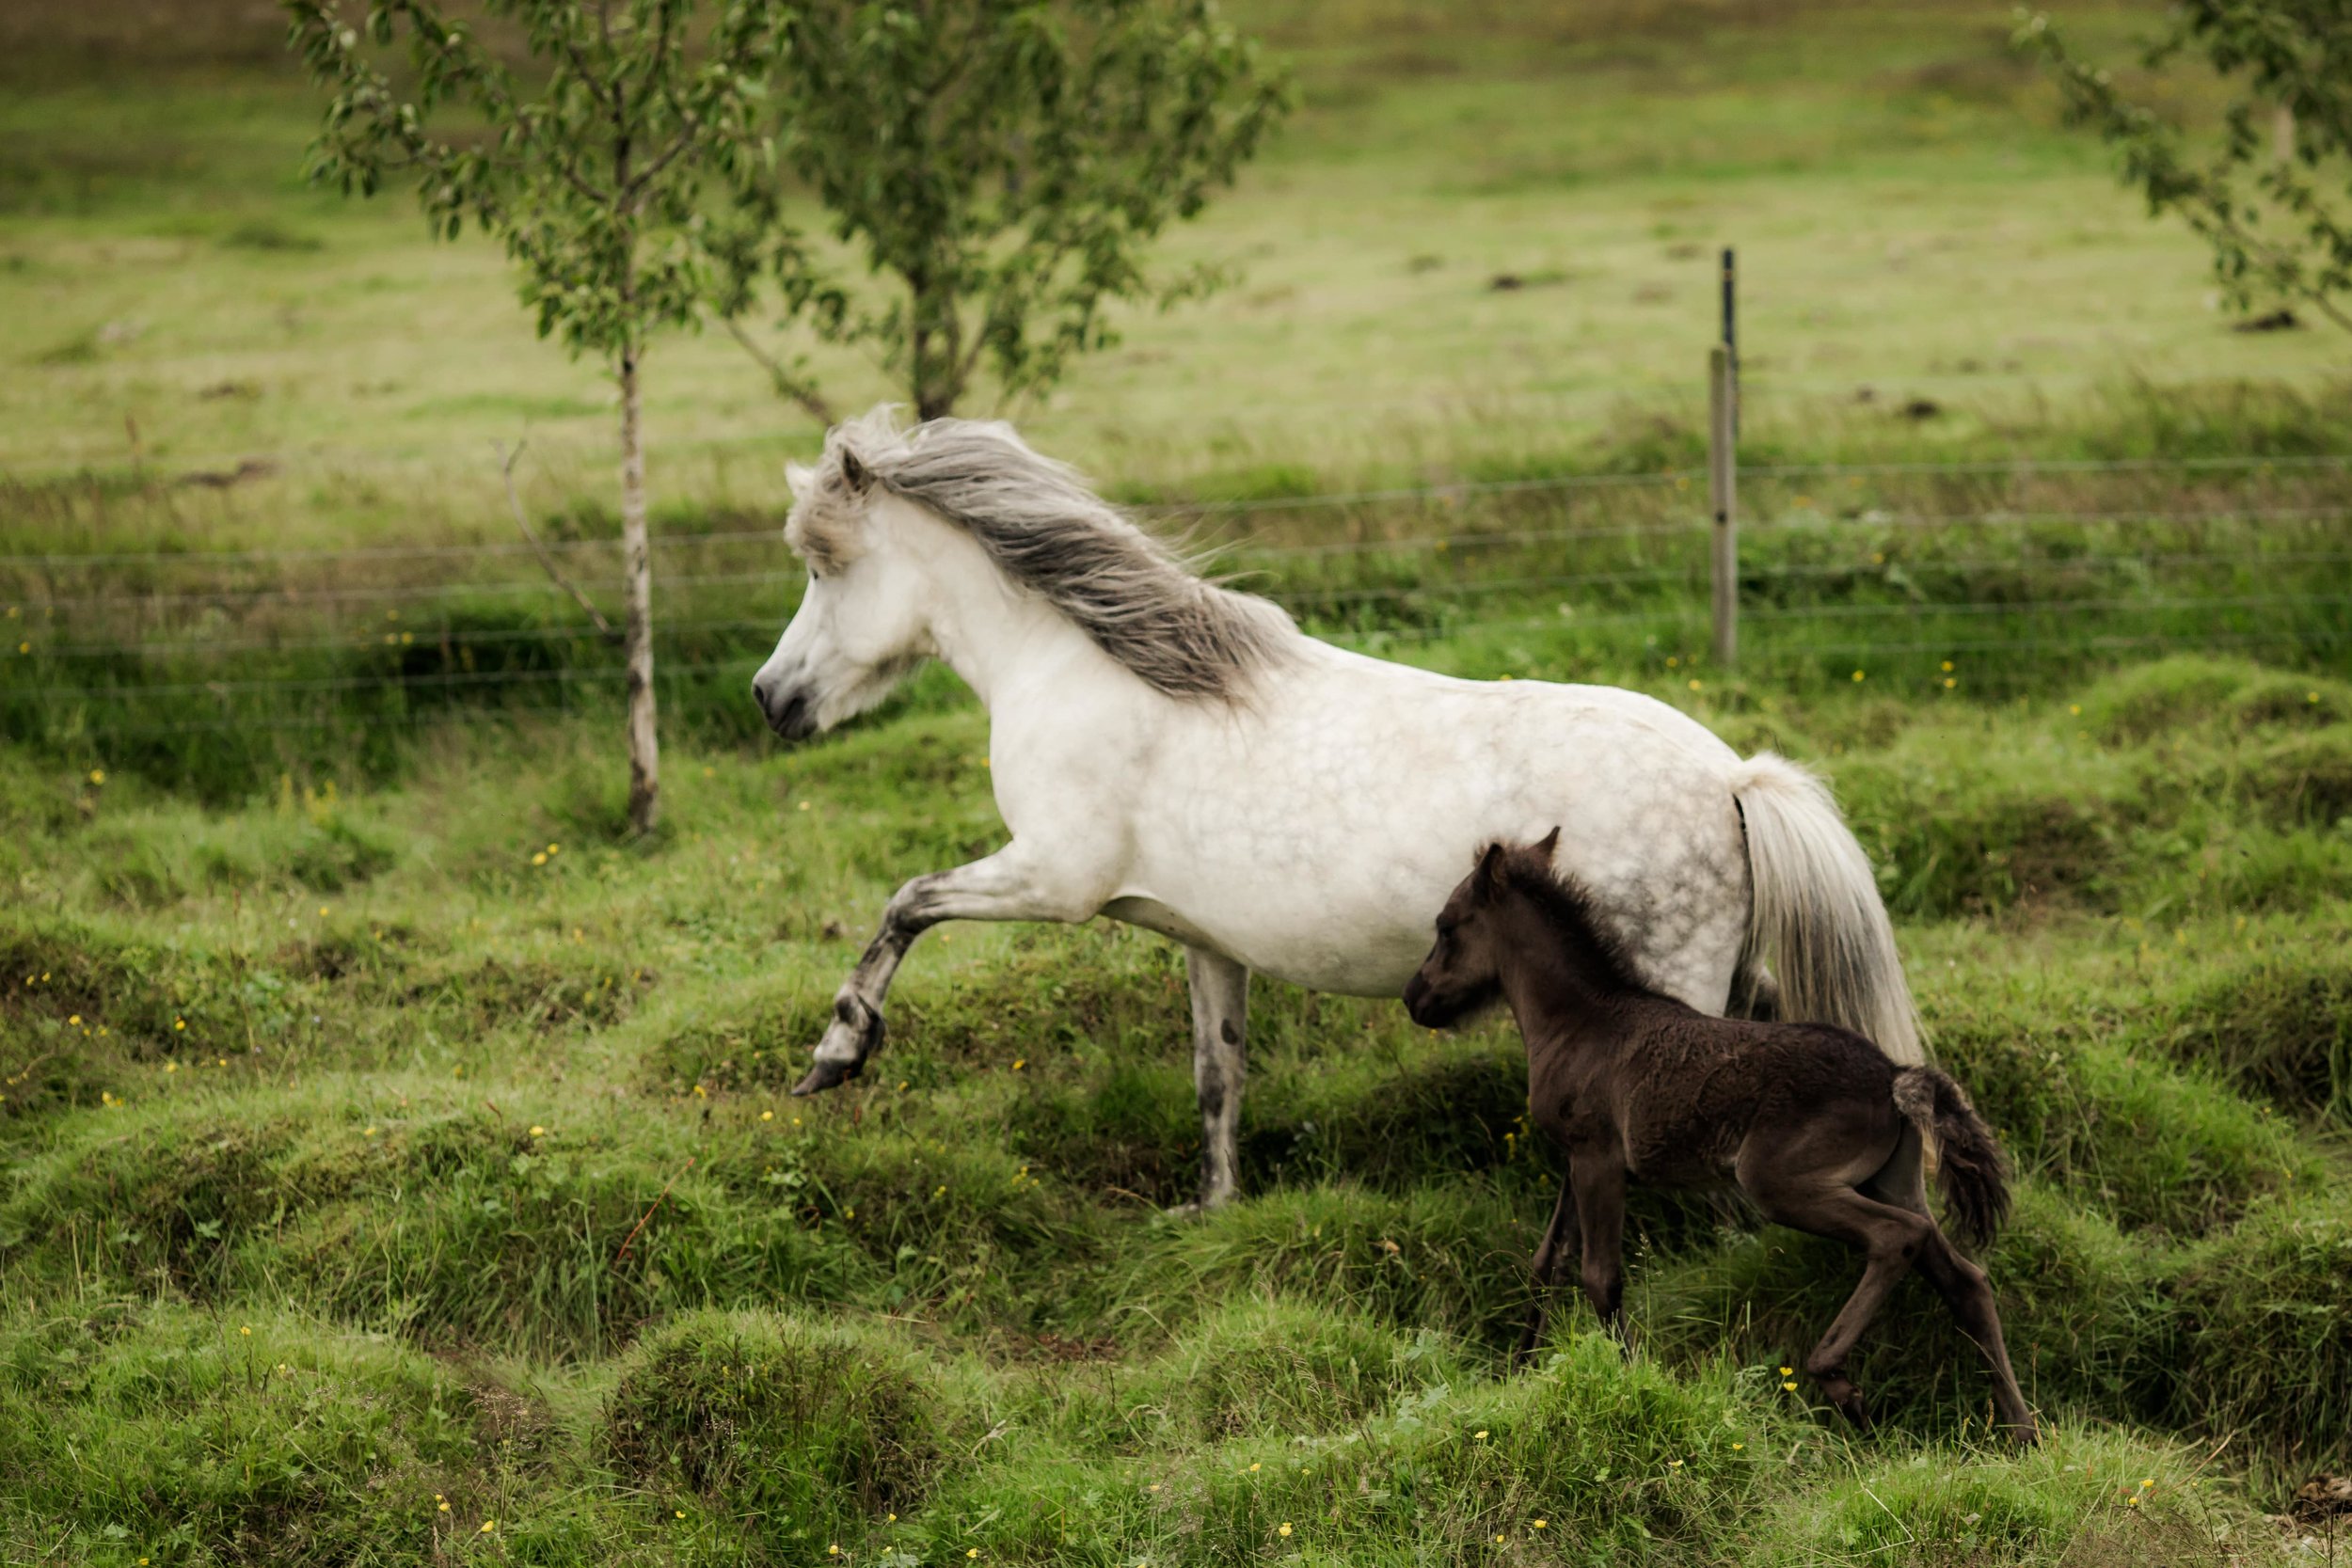 Horses in Iceland by Christina Swanson now on Cottage Hill28.jpg